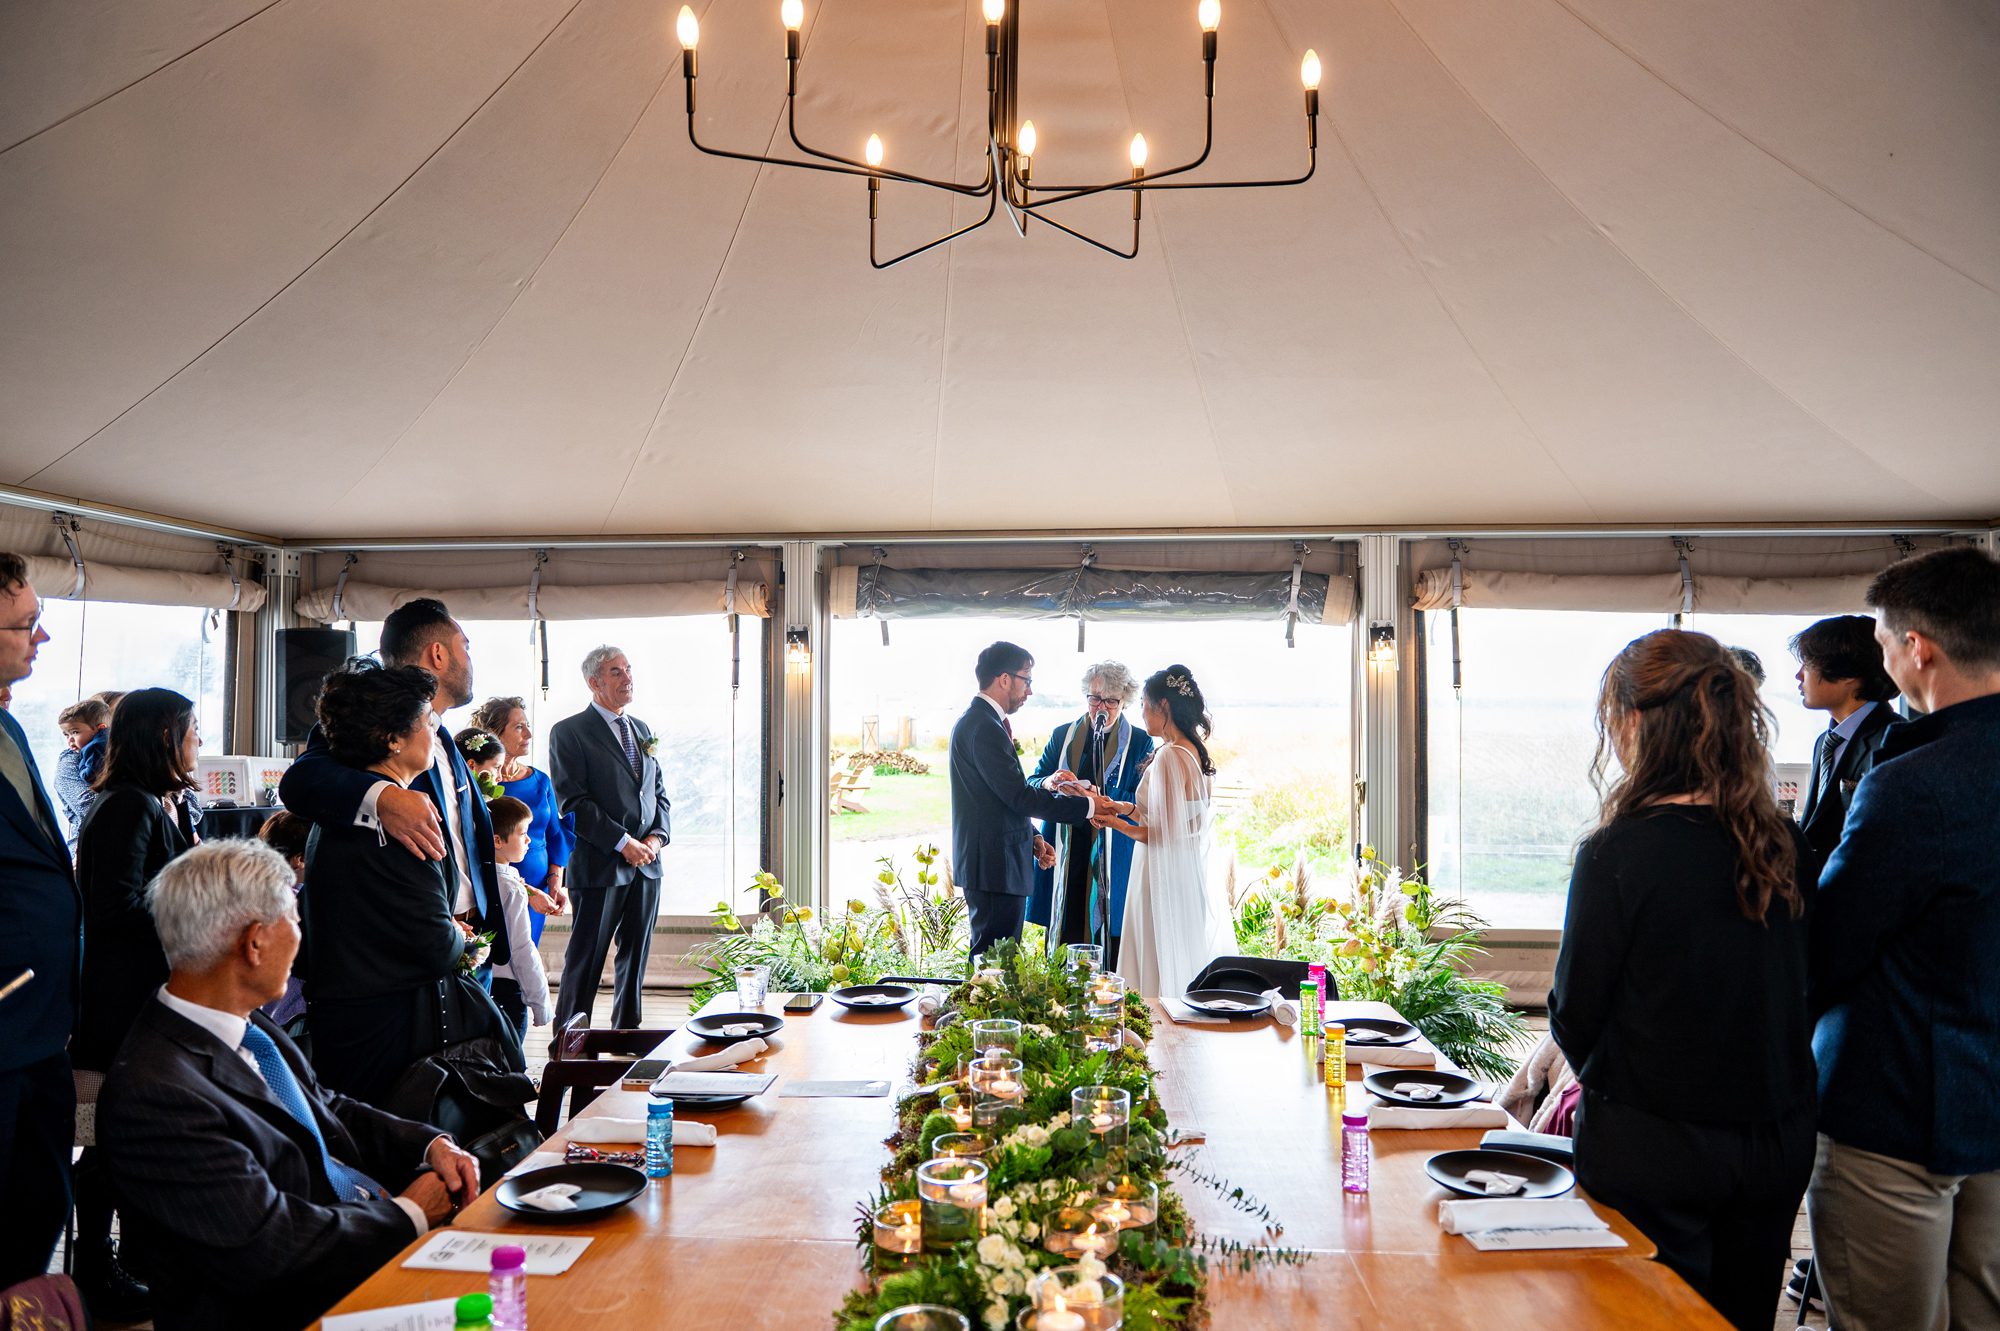 Wedding ceremony in a tent at Governors Island Collective Retreats, a unique wedding venue in NYC